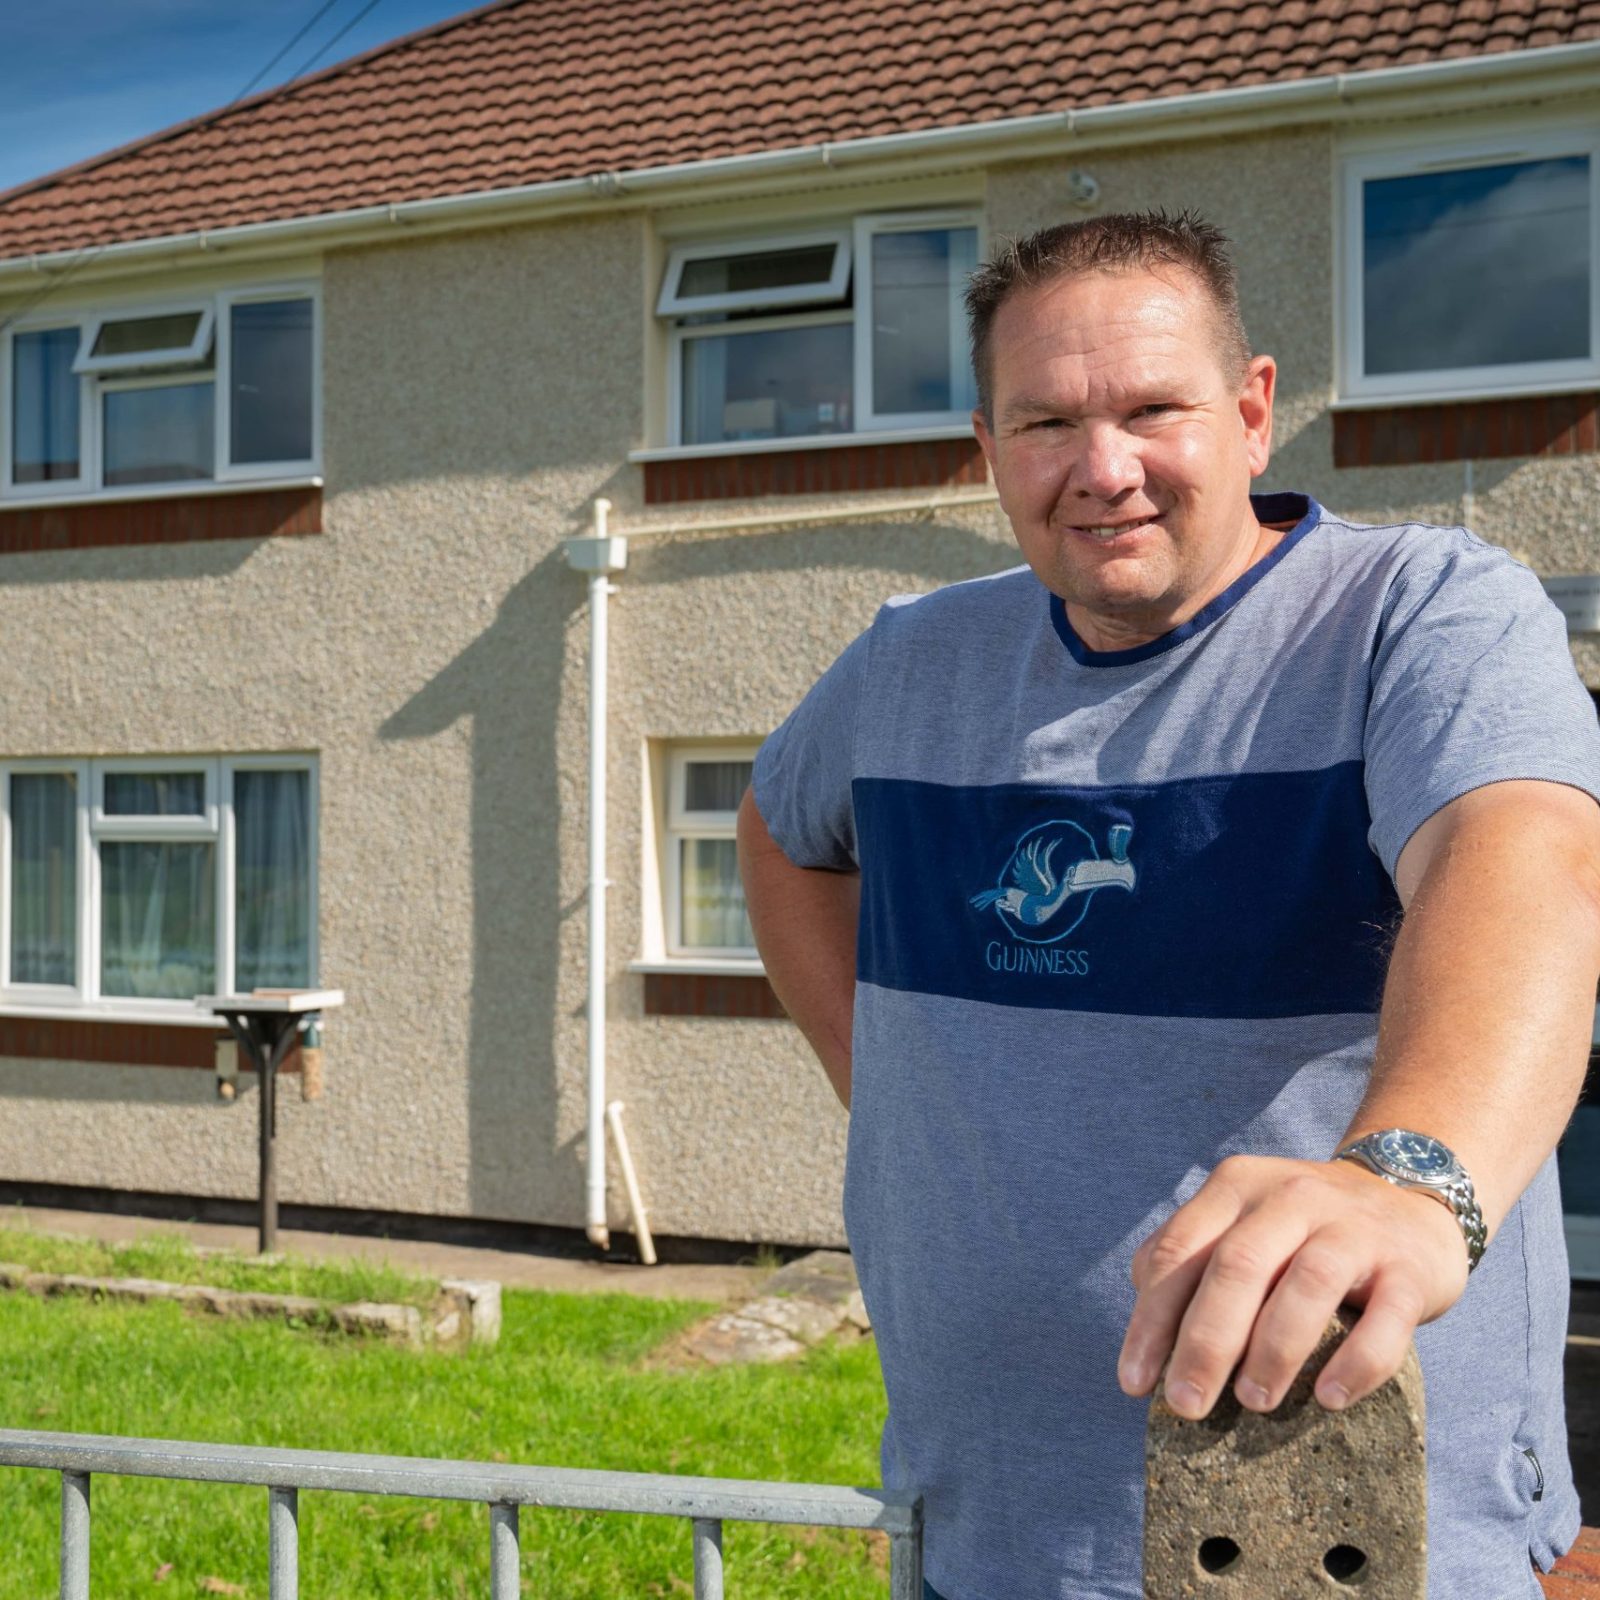 Trivallis Housing Landlord Wales A man stands in front of a two-story Trivallis house with a satellite dish on a sunny day, leaning on a metal fence with green grass in the background.